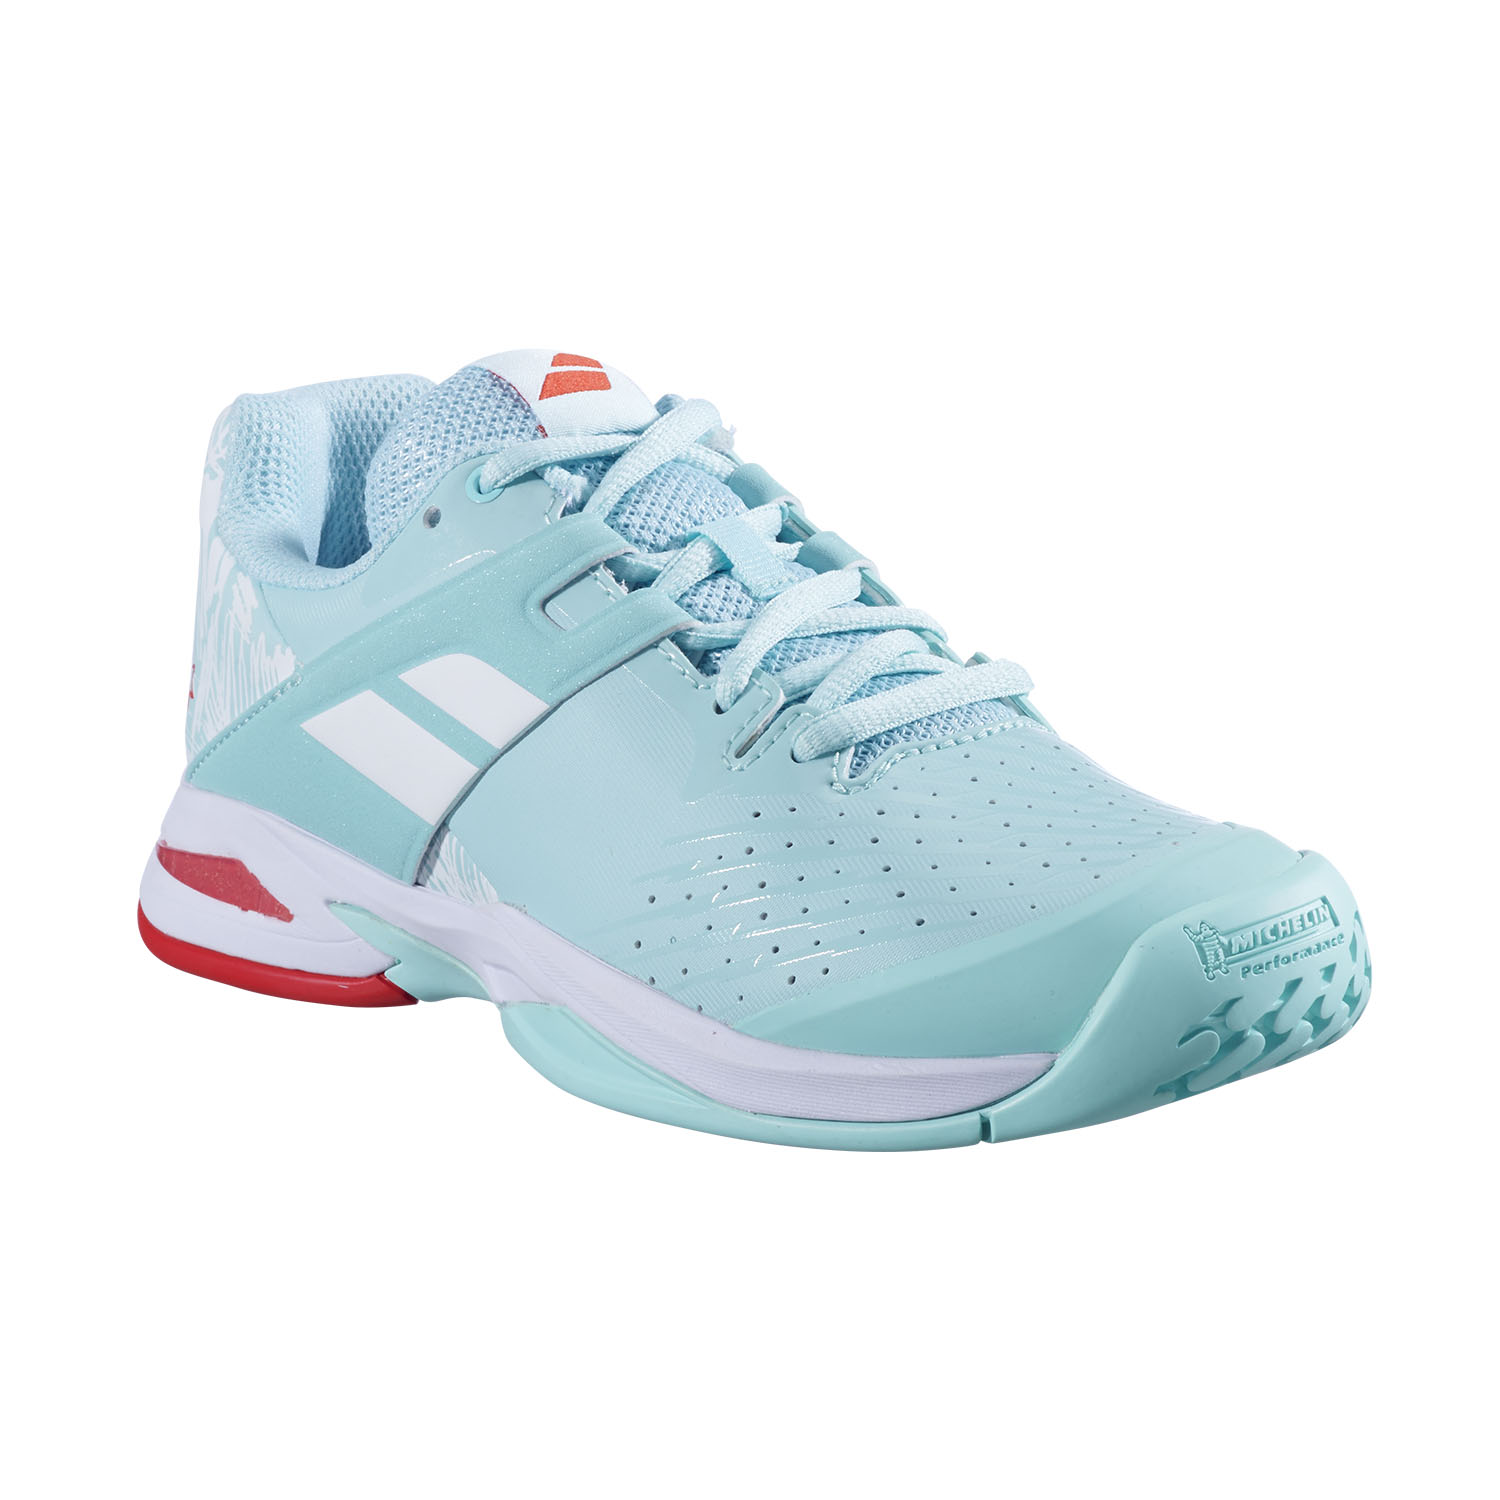 Babolat Propulse All Court Junior's Tennis Shoes - Yucca/White